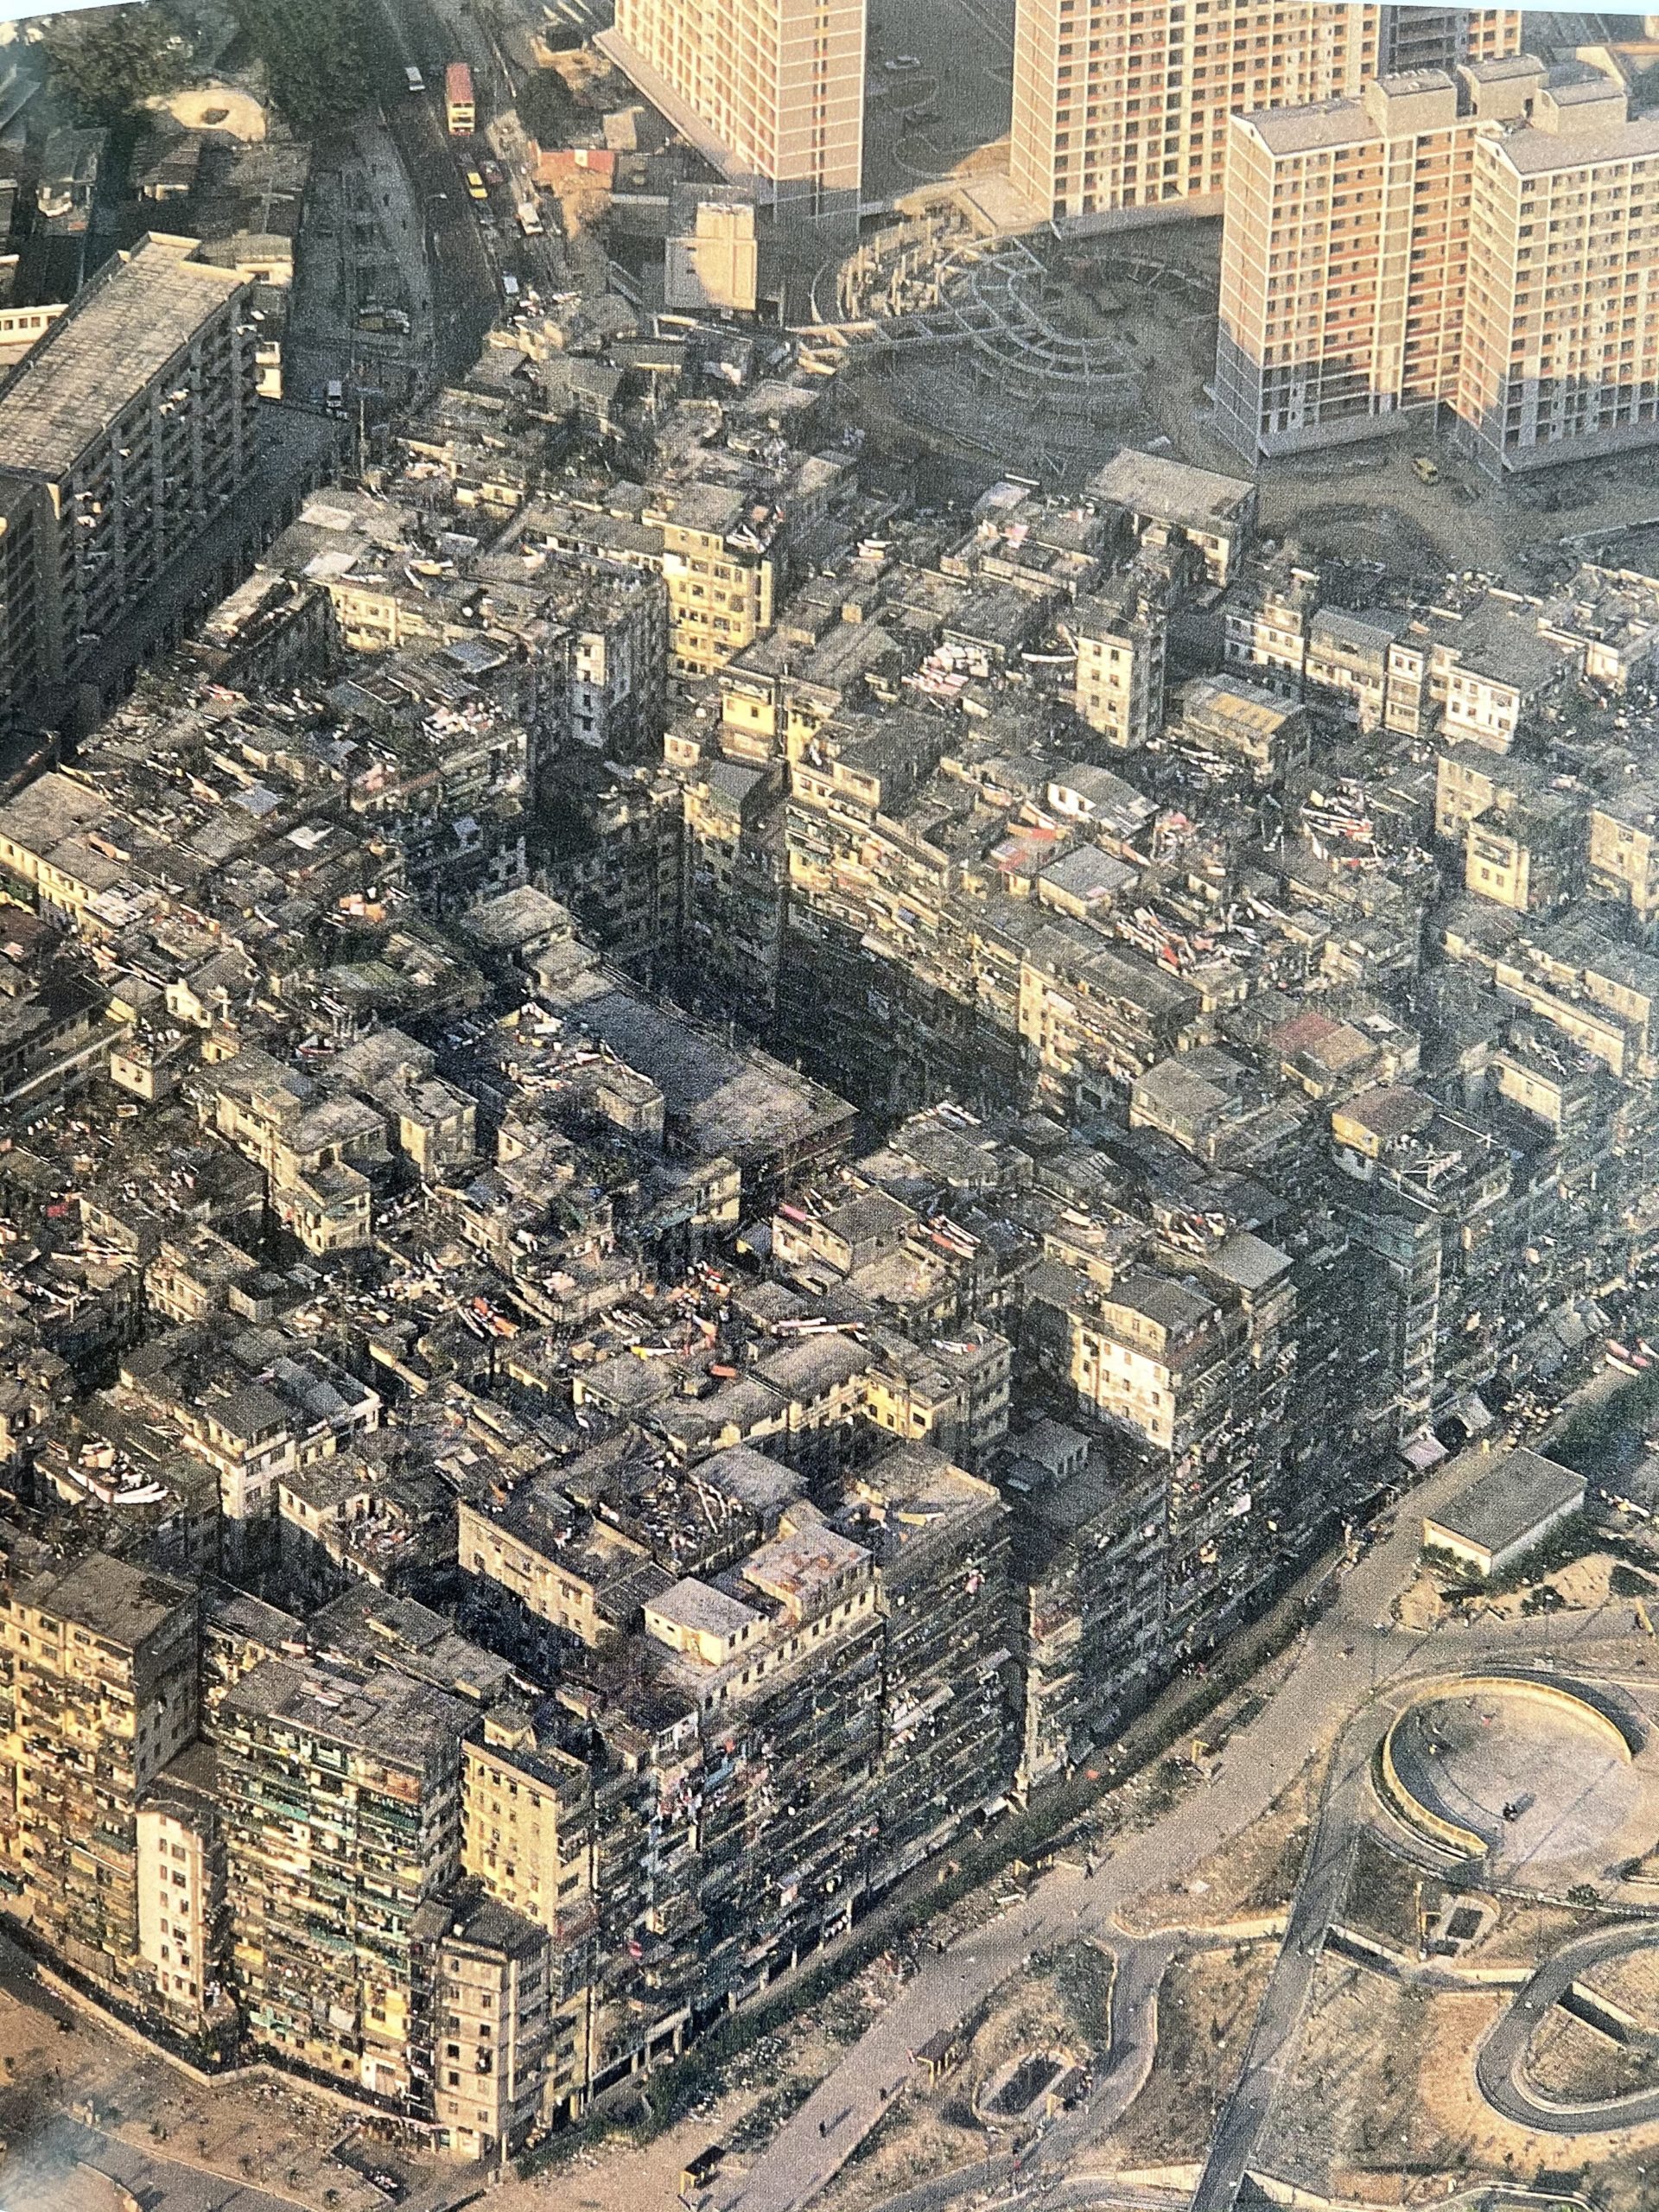 City of Darkness. Life in Kowloon Walled City. - Galerie Babylone